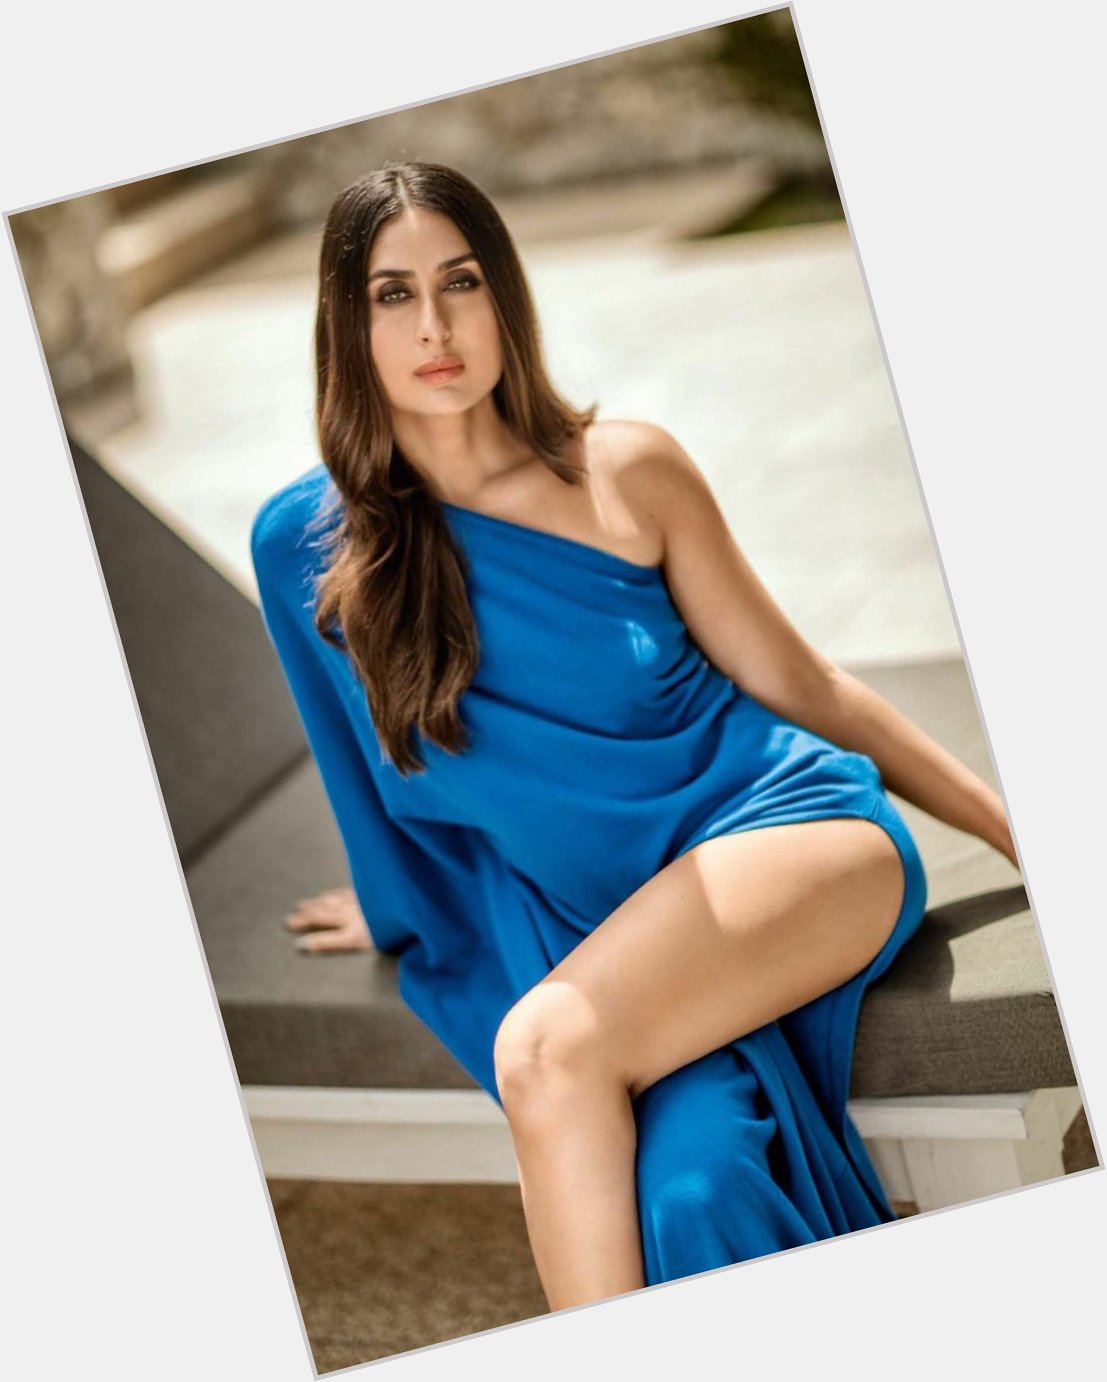 Happy birthday to the fabulous actress the One and Only Kareena Kapoor Khan!     